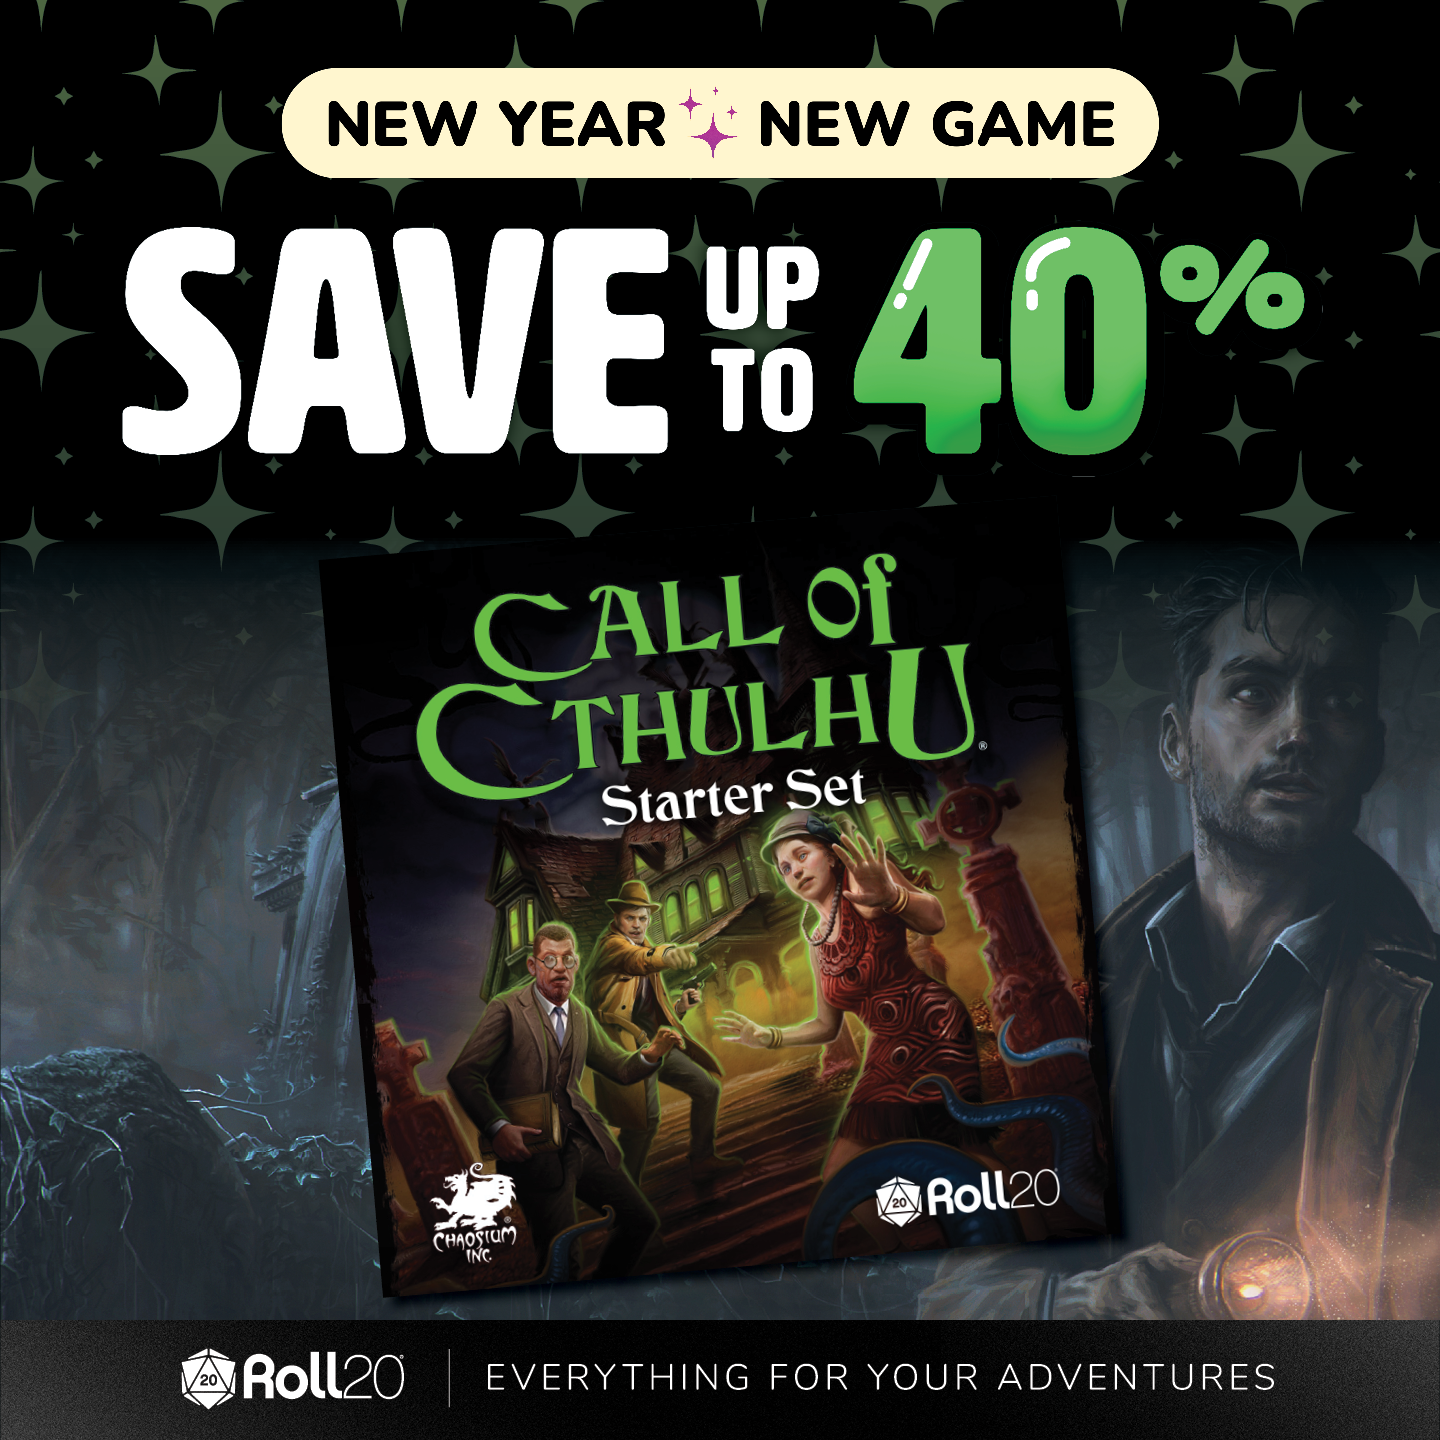 Call of Cthulhu Starter Set at Roll20 - 40% off